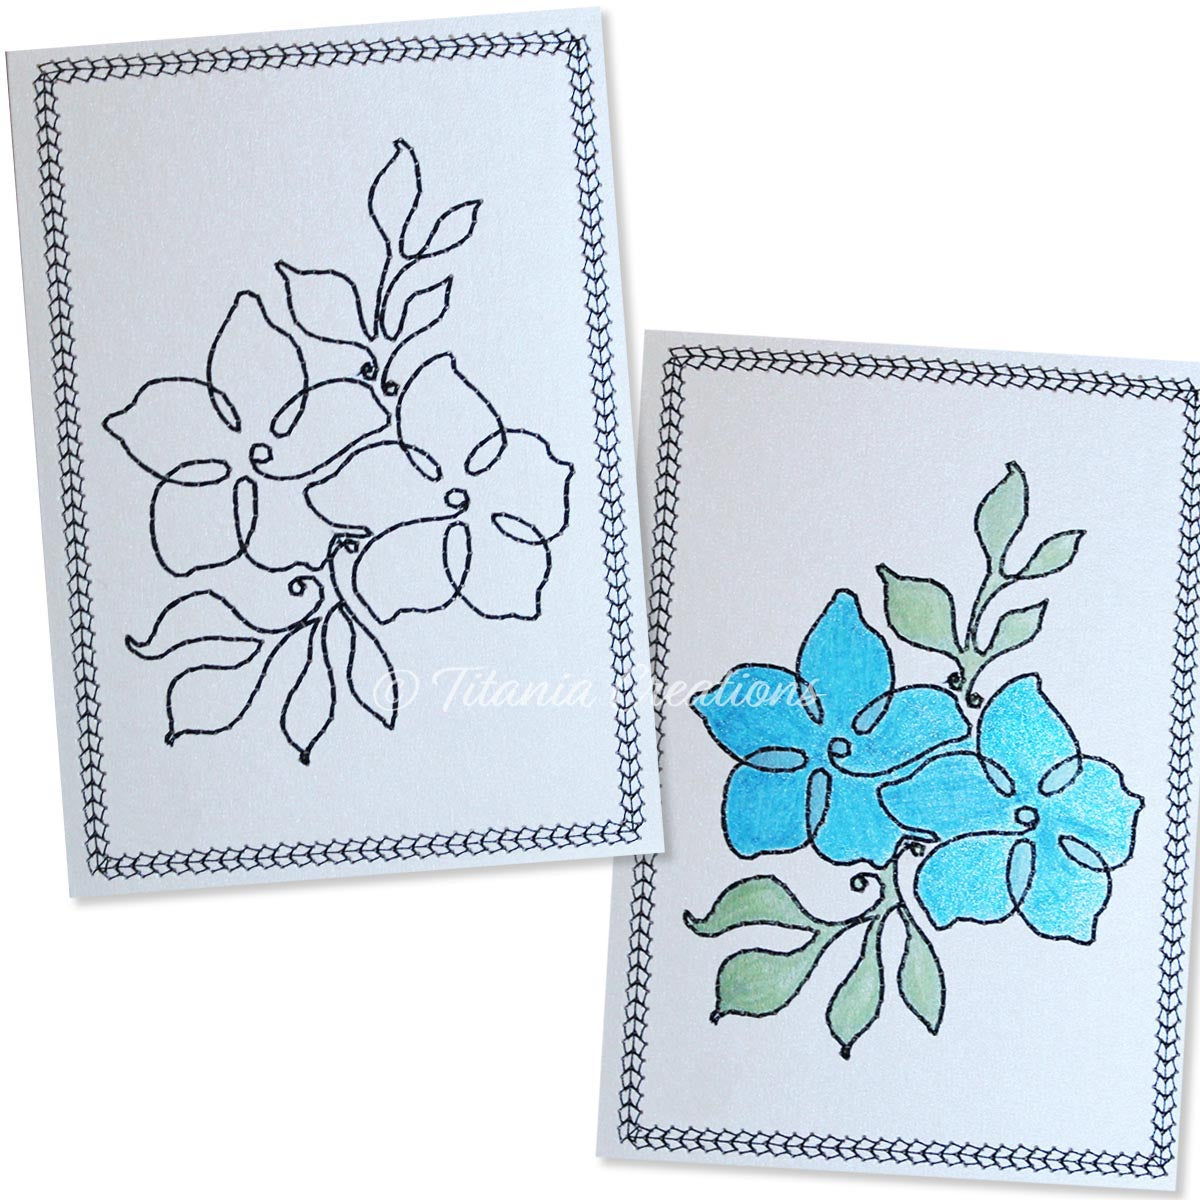 Simply Floral 10 Card Stock Design 5x7